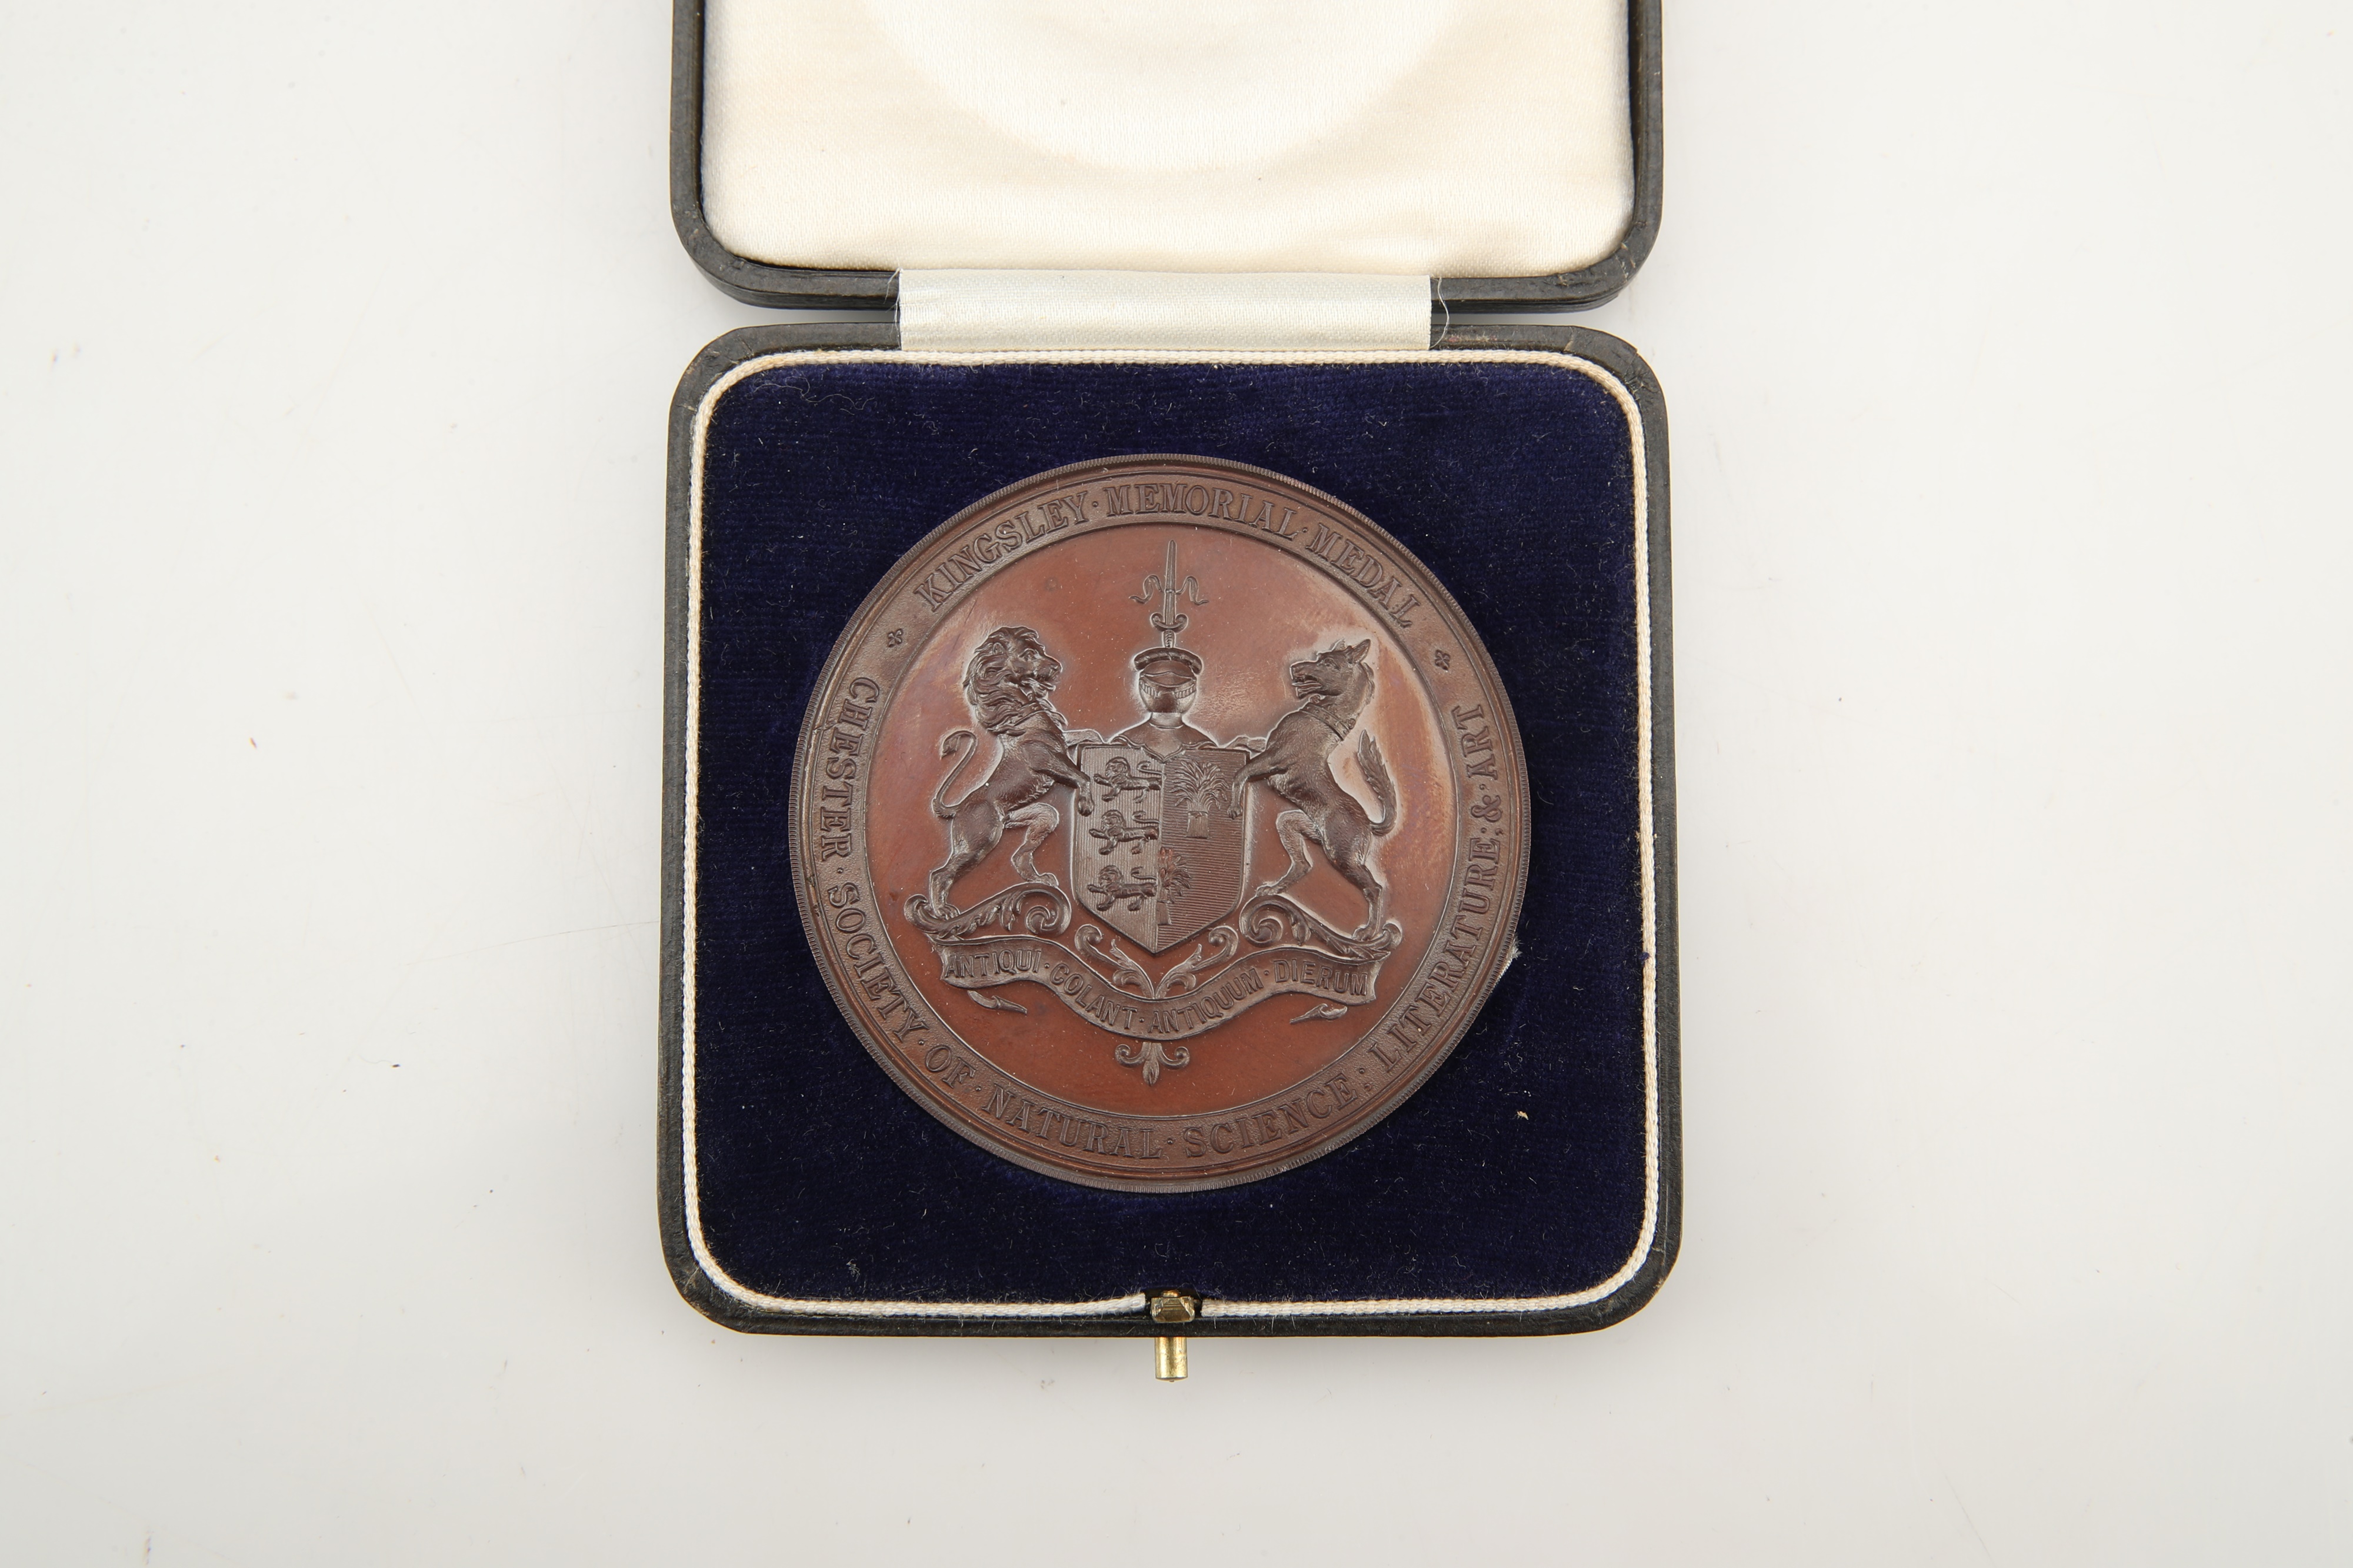 Chester Society of Natural Science, Literature & Art Kingsley Memorial Medals - Image 3 of 5